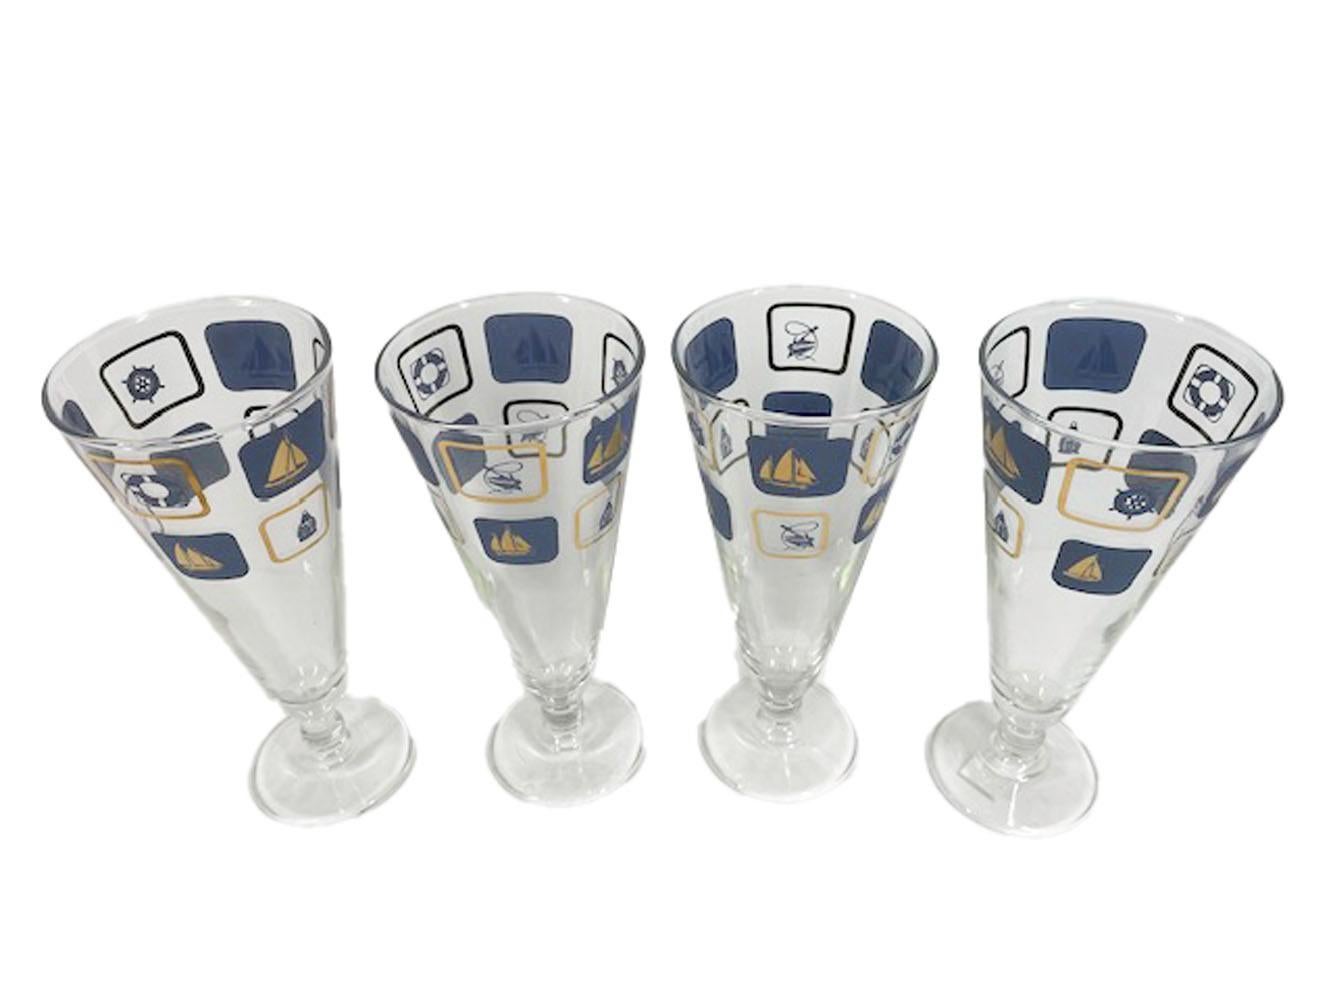 Vintage nautical themed pilsner glasses with two rows of rectangles, each containing a sailboat or nautical object, in blue enamel and 22 karat gold.